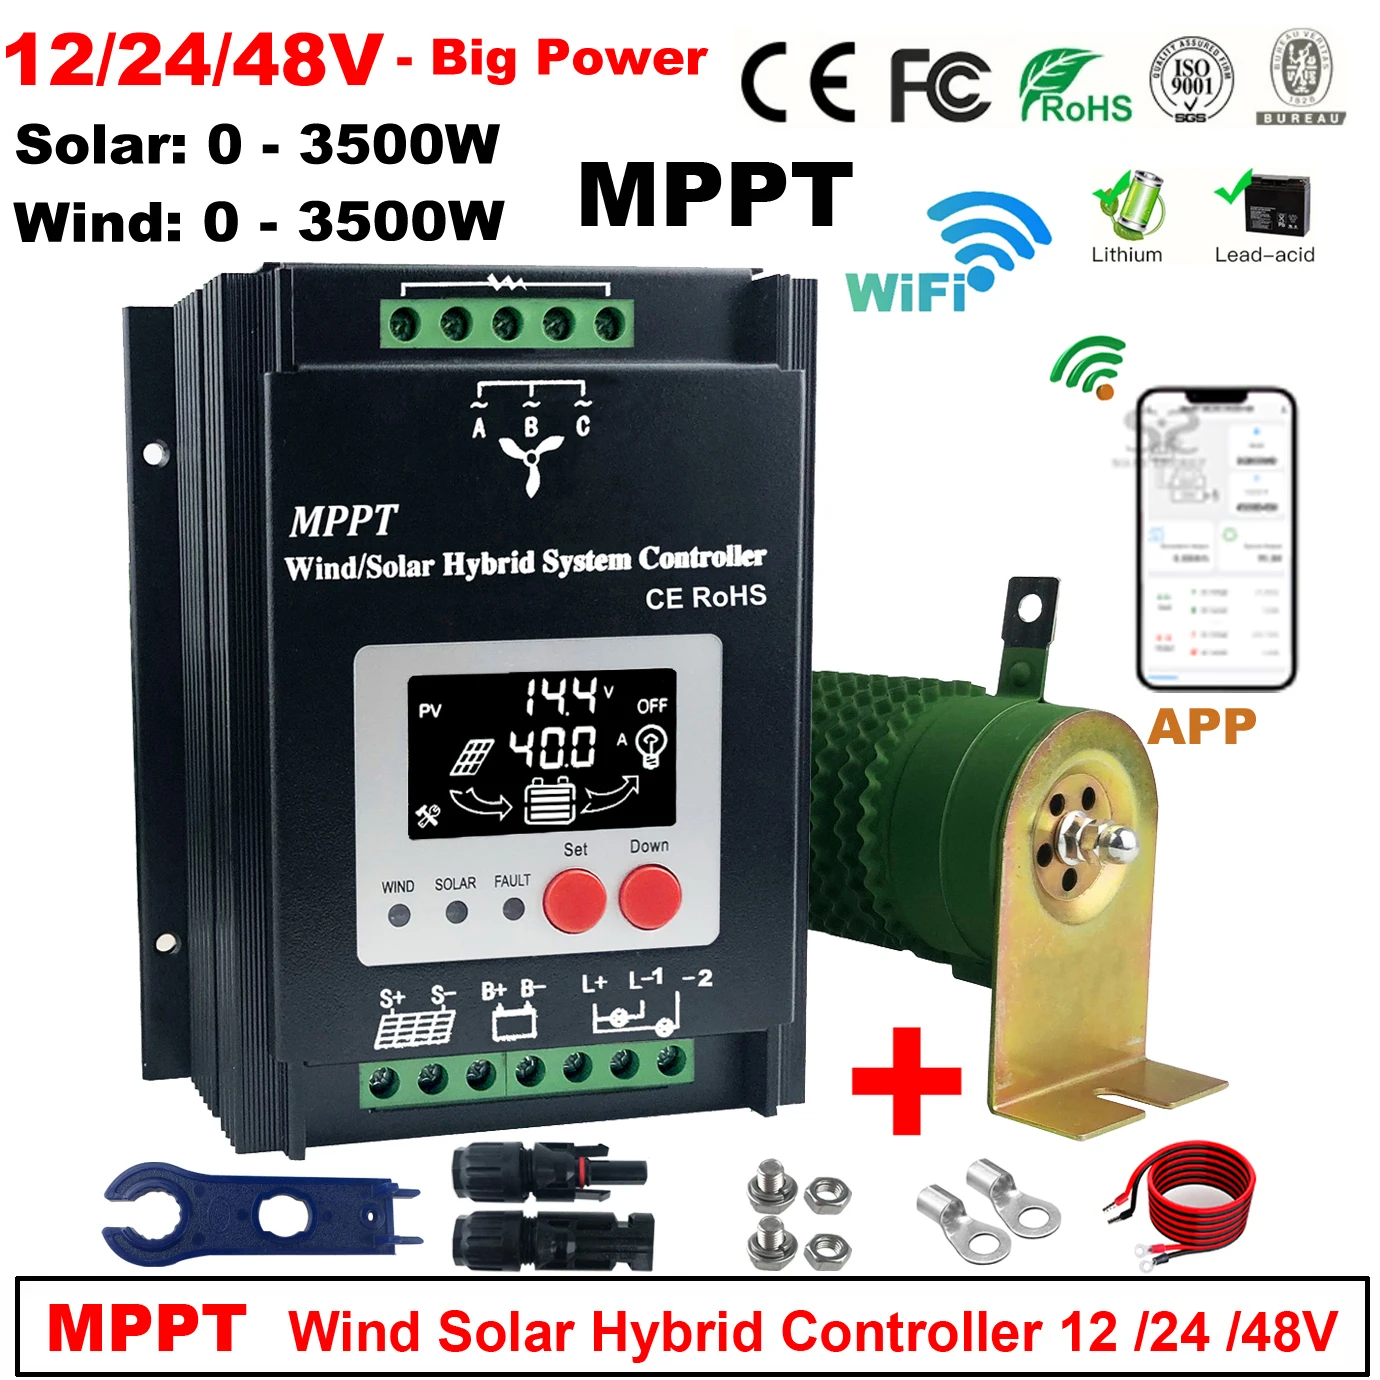 

3000W 5000w MPPT Wind Solar Hybrid Charge Controller 12v 24v 48V LCD Display Wifi Monitor For Lifepo4 Lithium Lead Acid Battery